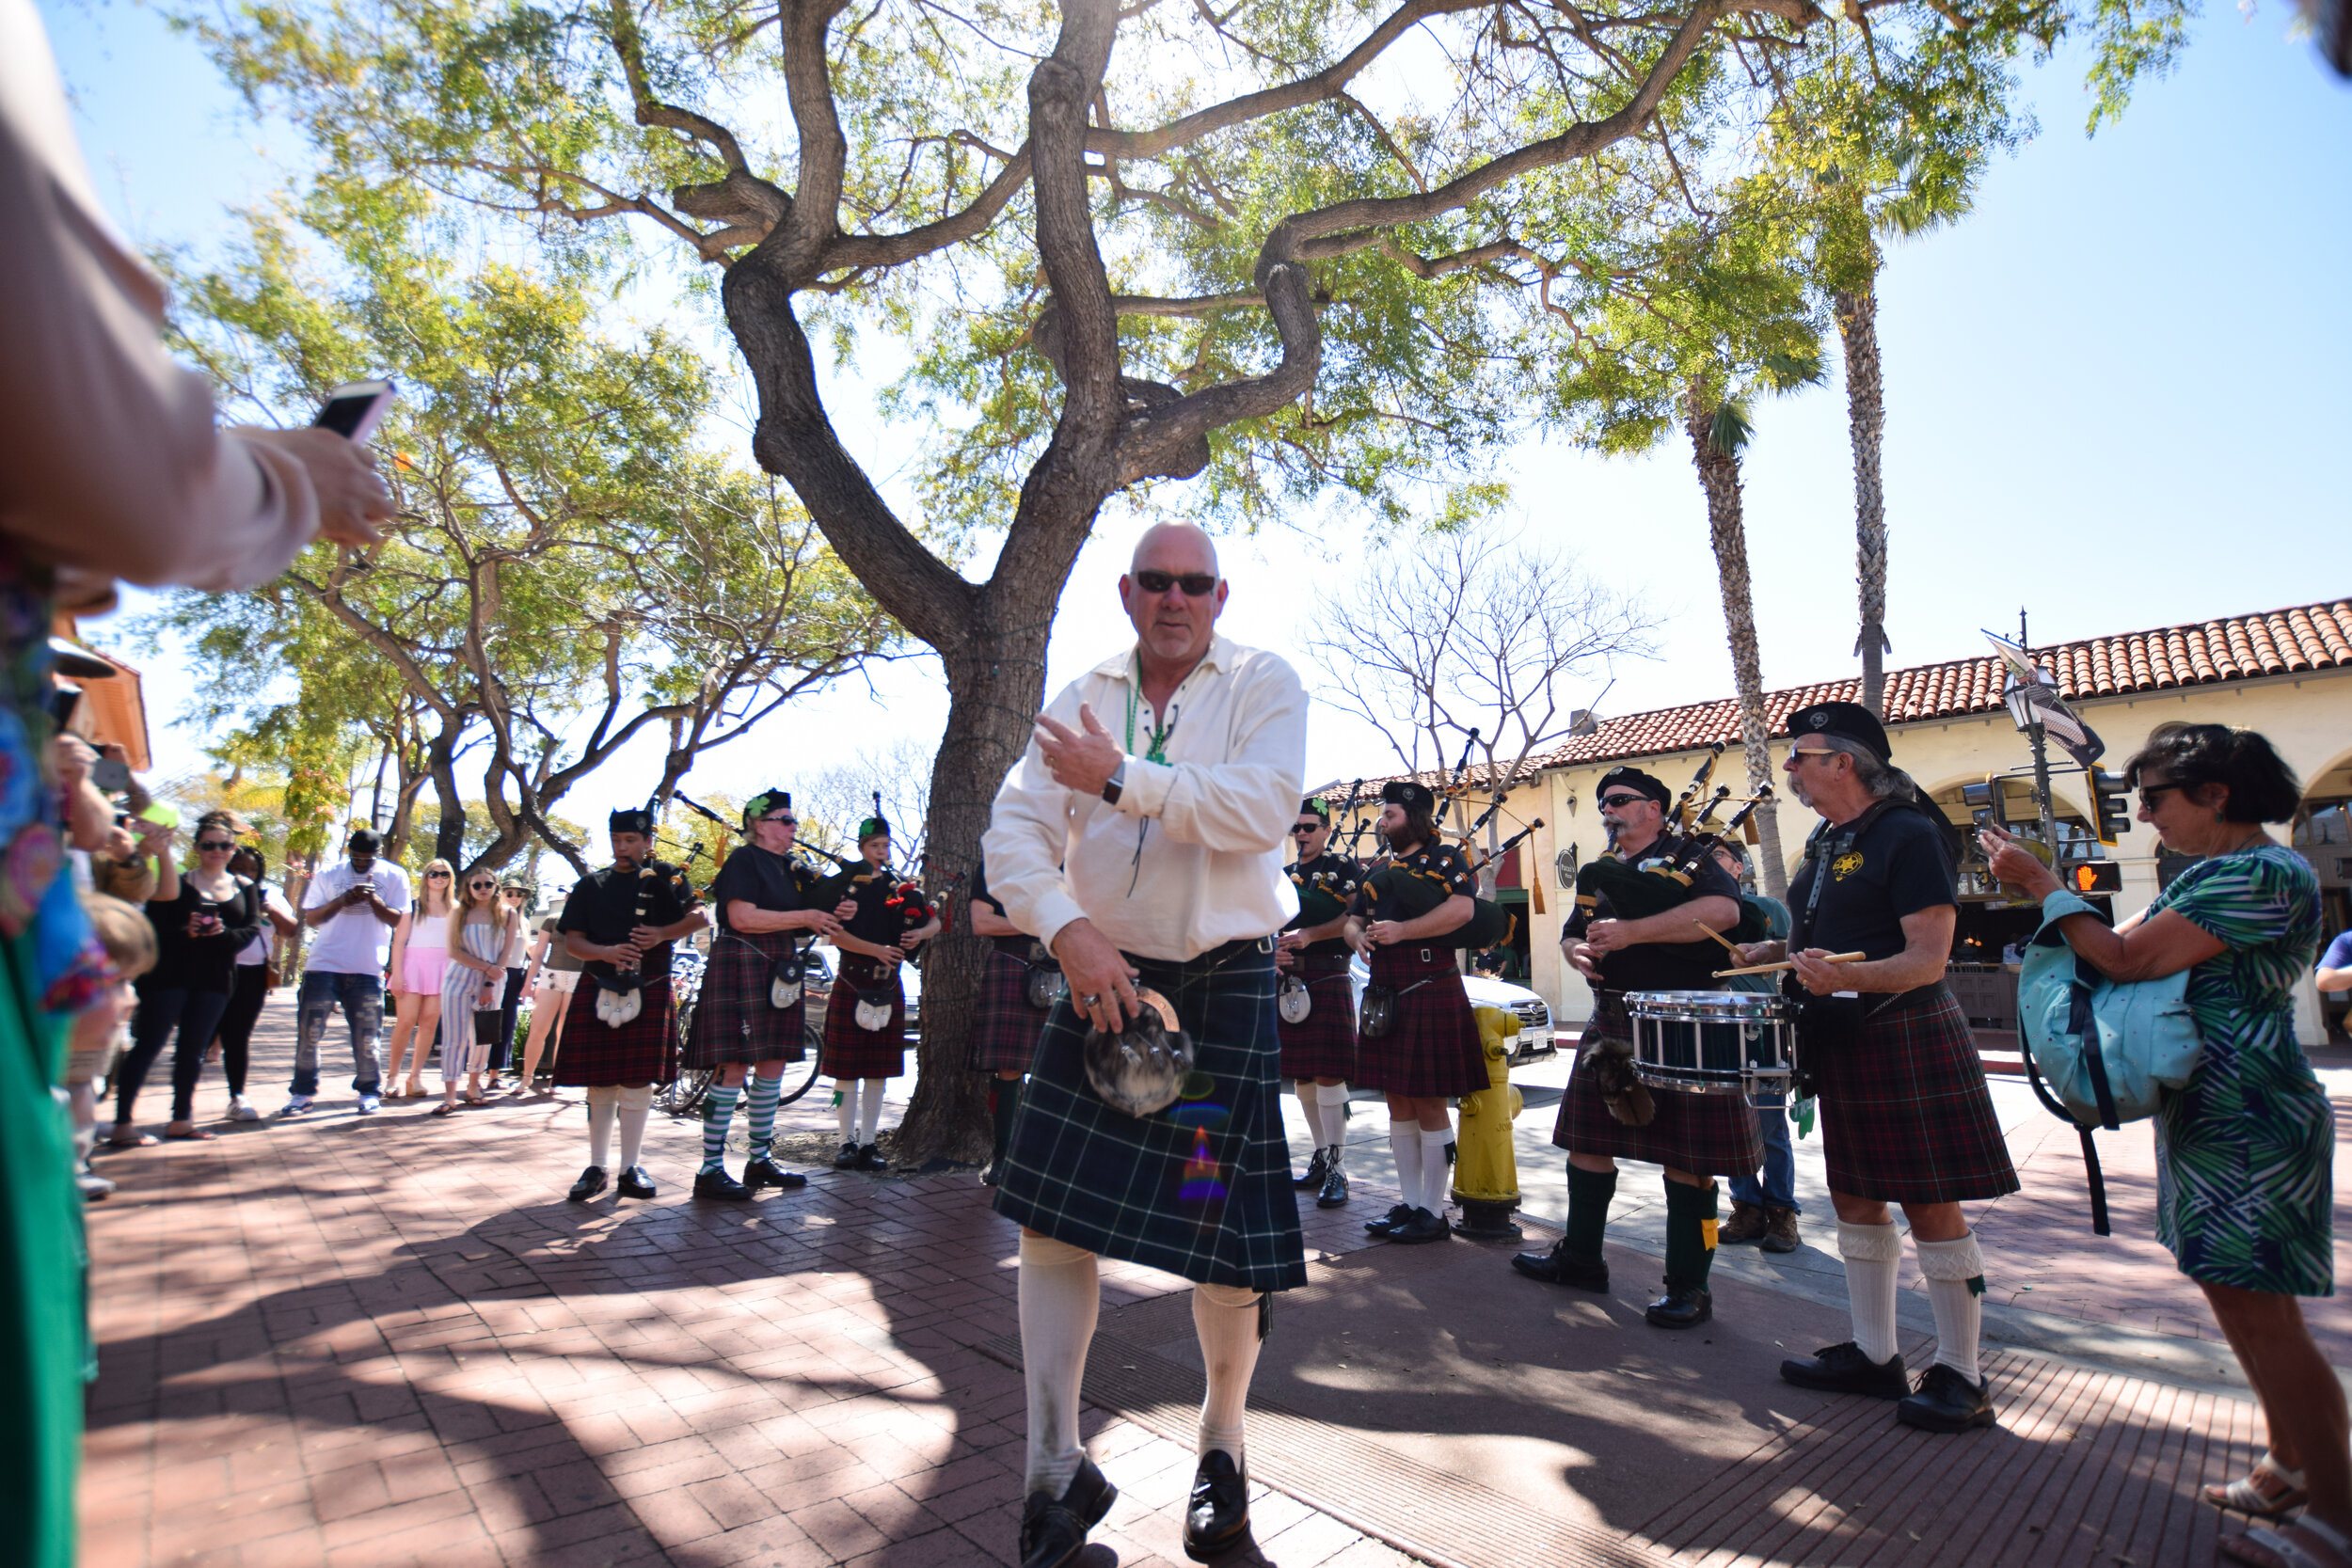  Members of the Santa Barbara Sheriff Pipe and Drum Corps ended the stroll in front of Institution Ale. 